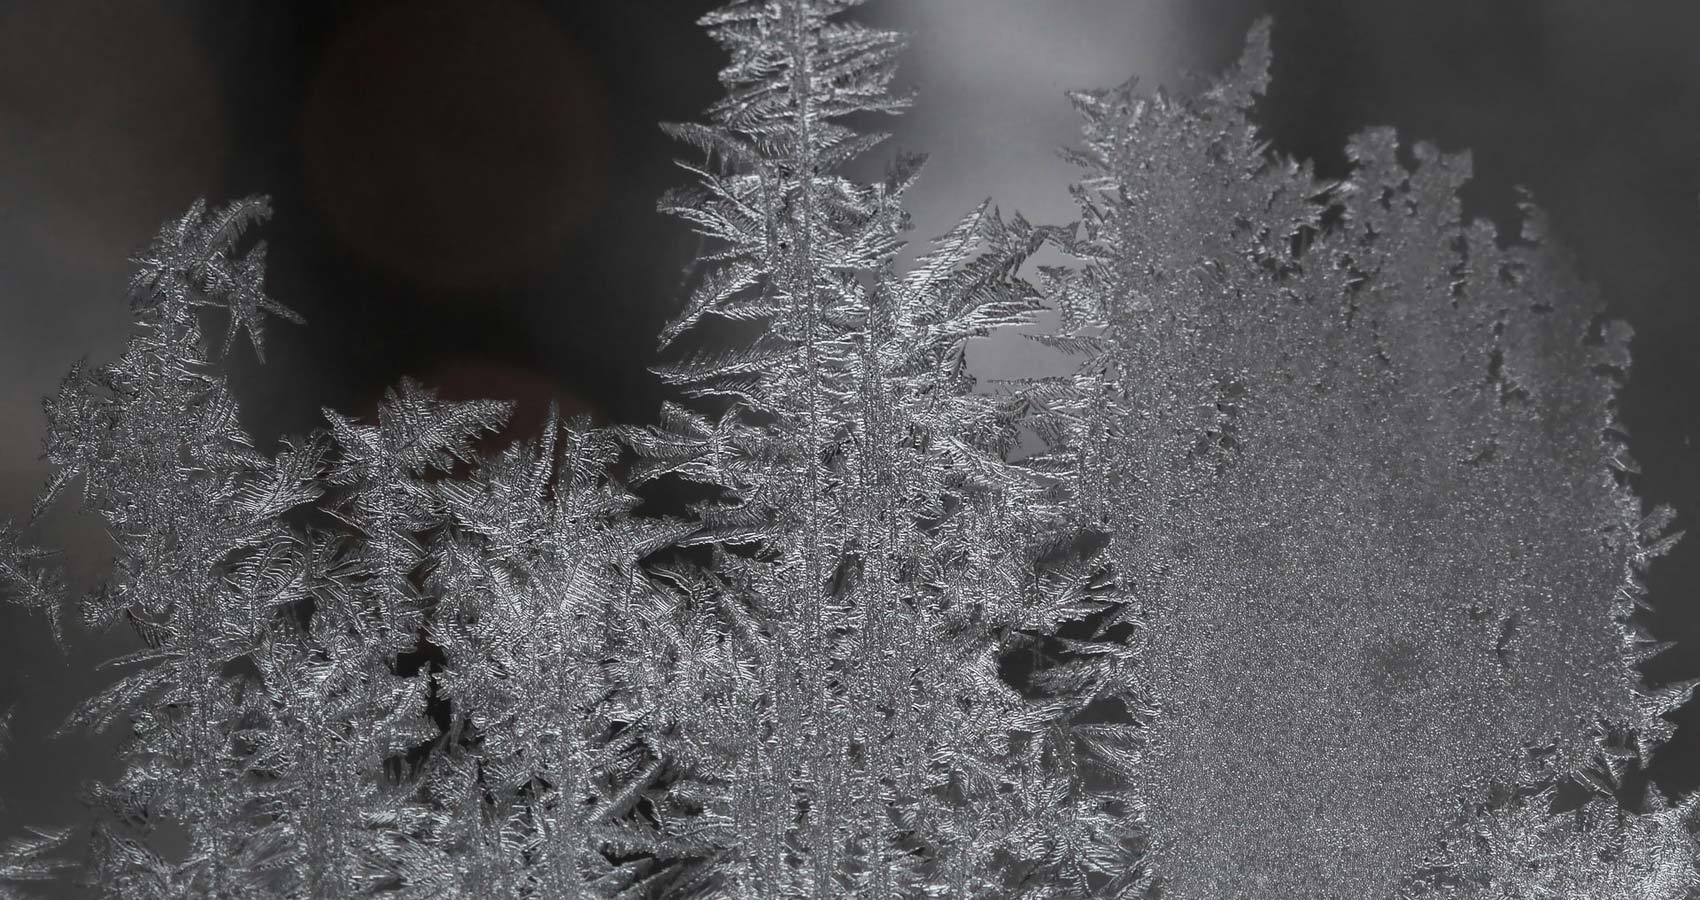 Through Frosted Window, poetry by James Lilley at Spillwords.com